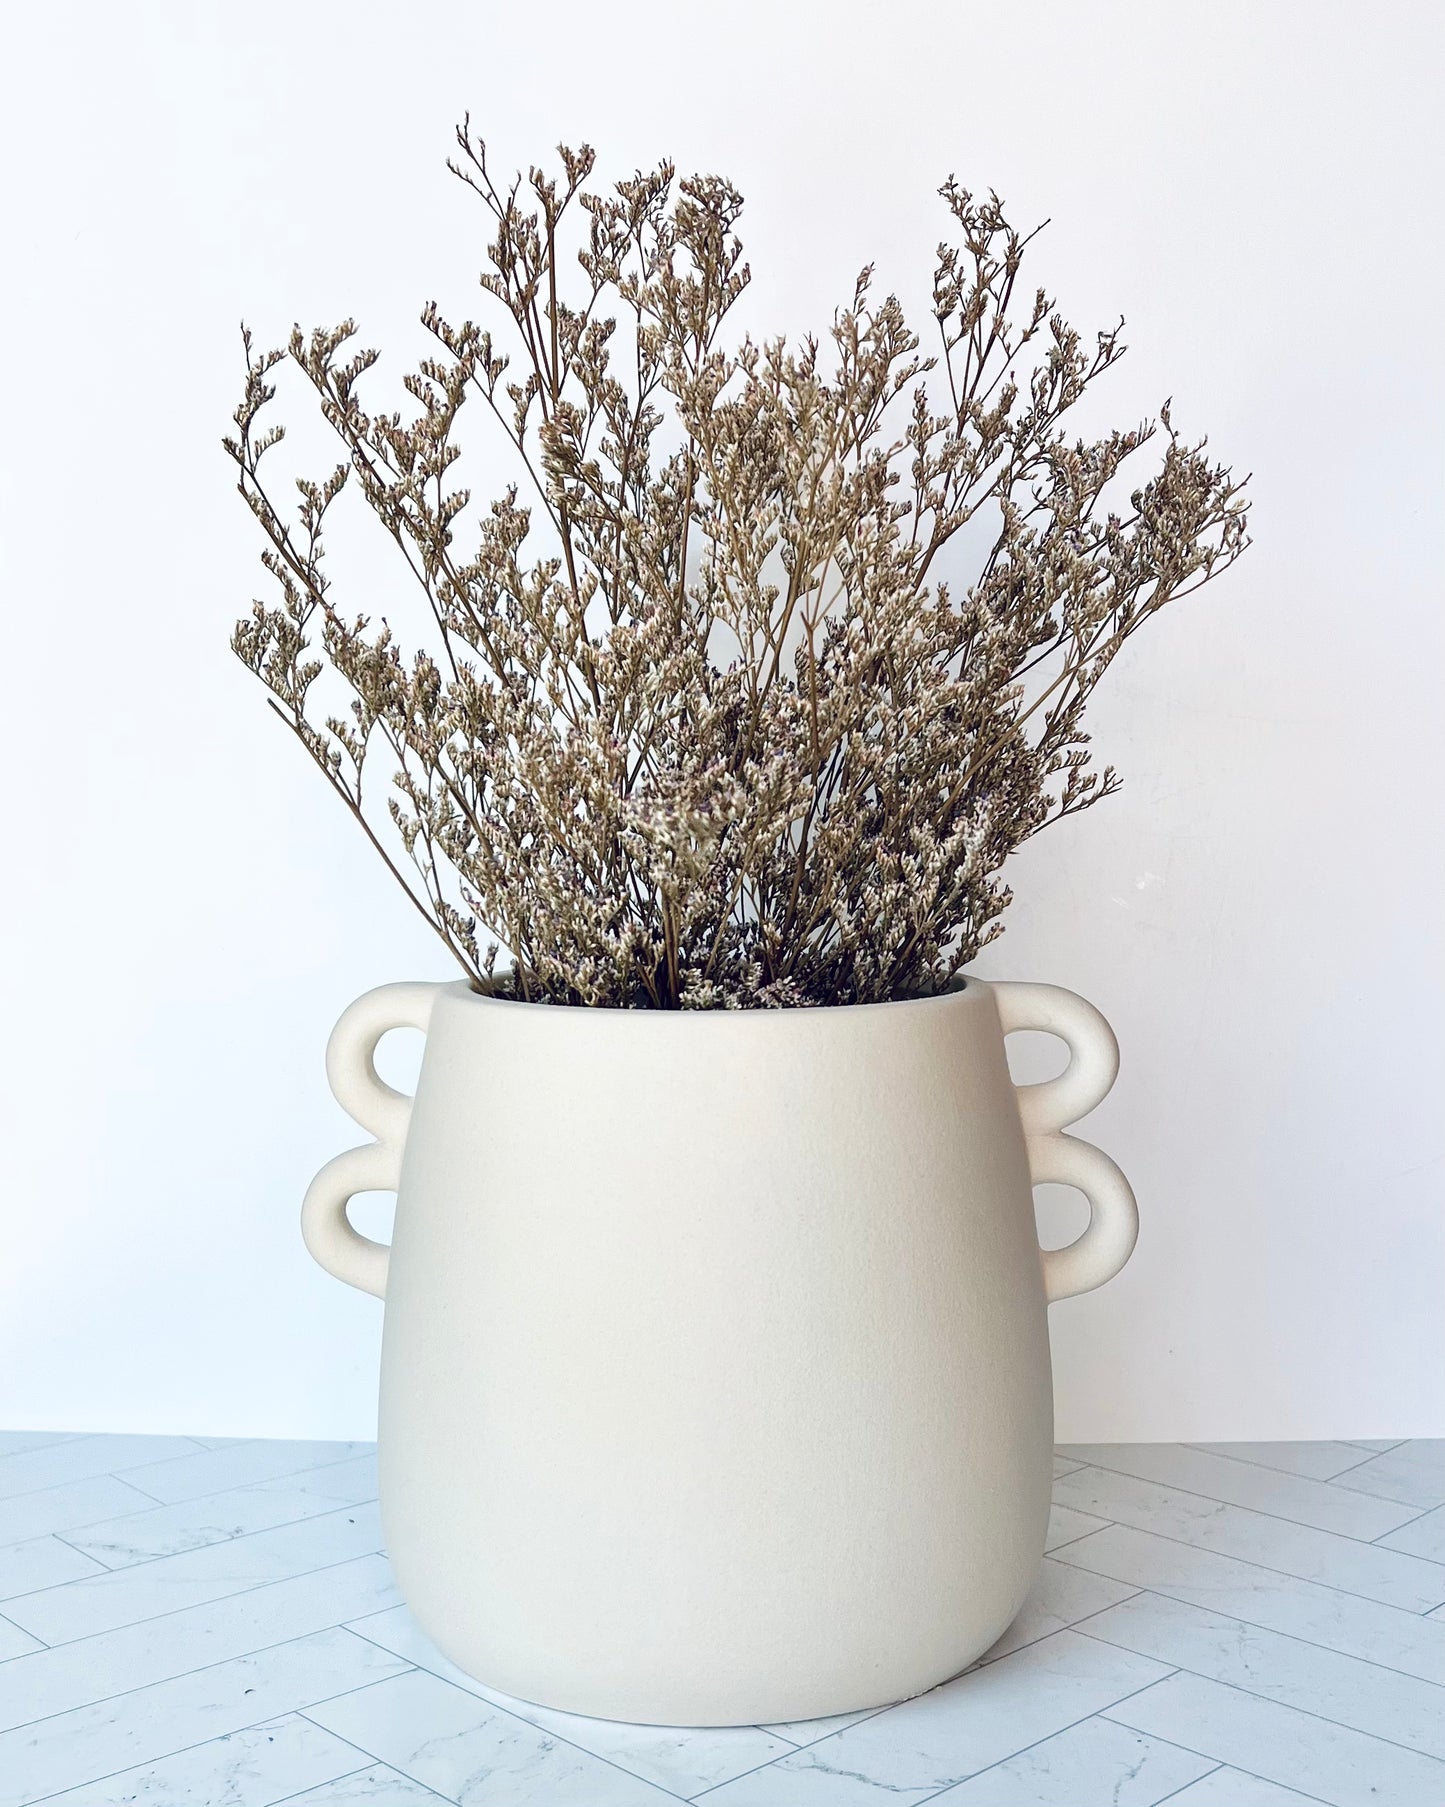 The Chiara White Vase filled with dried flower stems